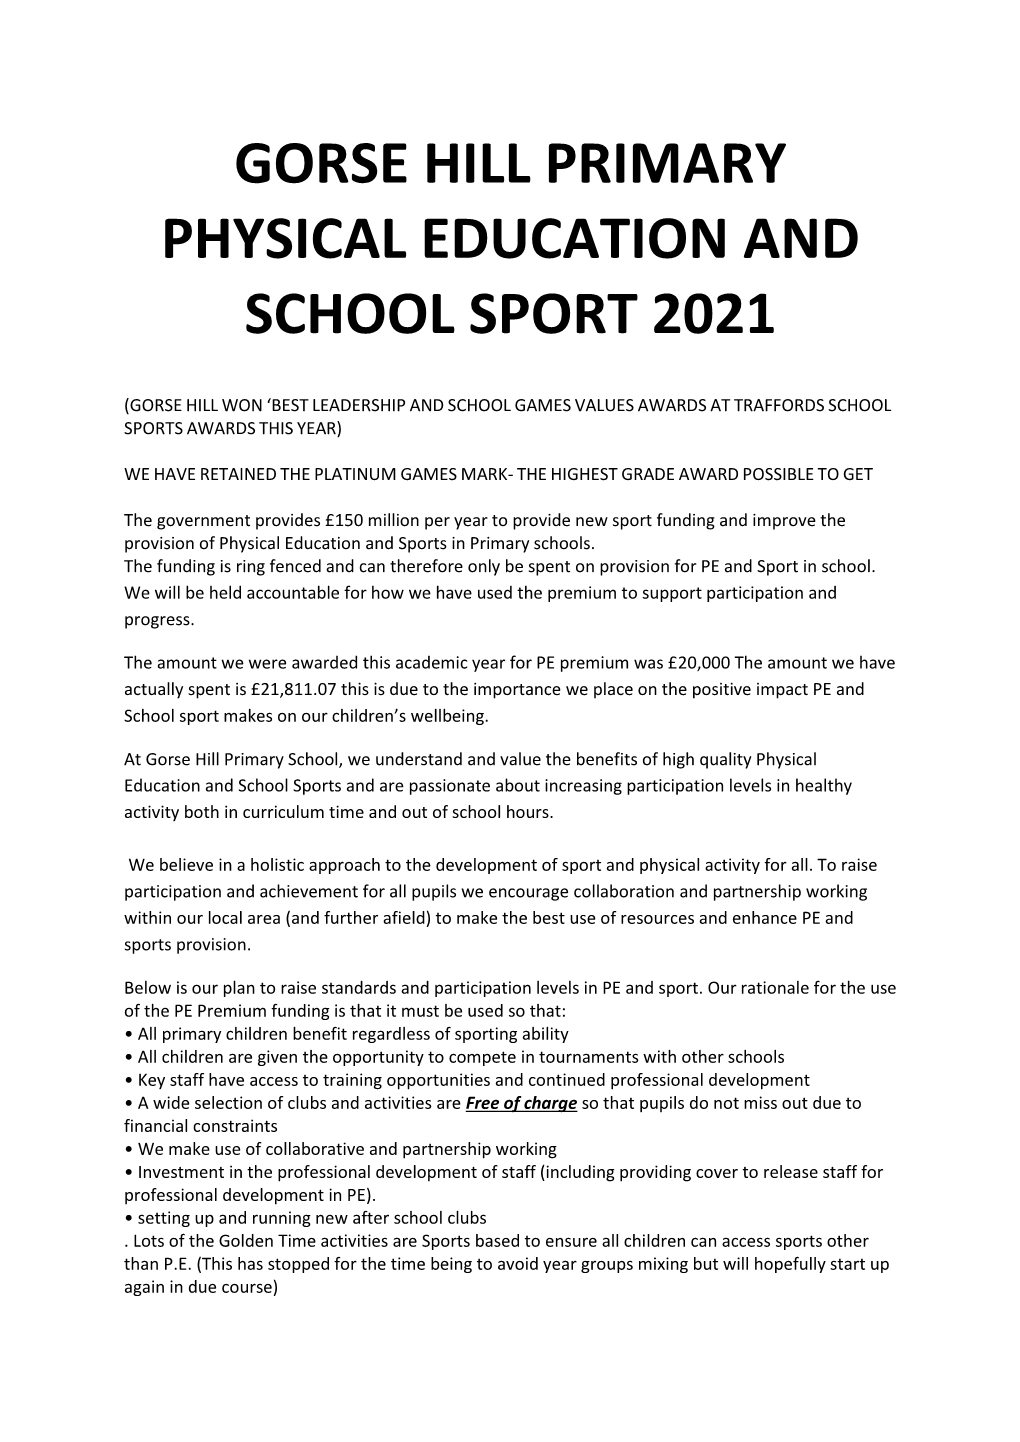 Gorse Hill Primary Physical Education and School Sport 2021